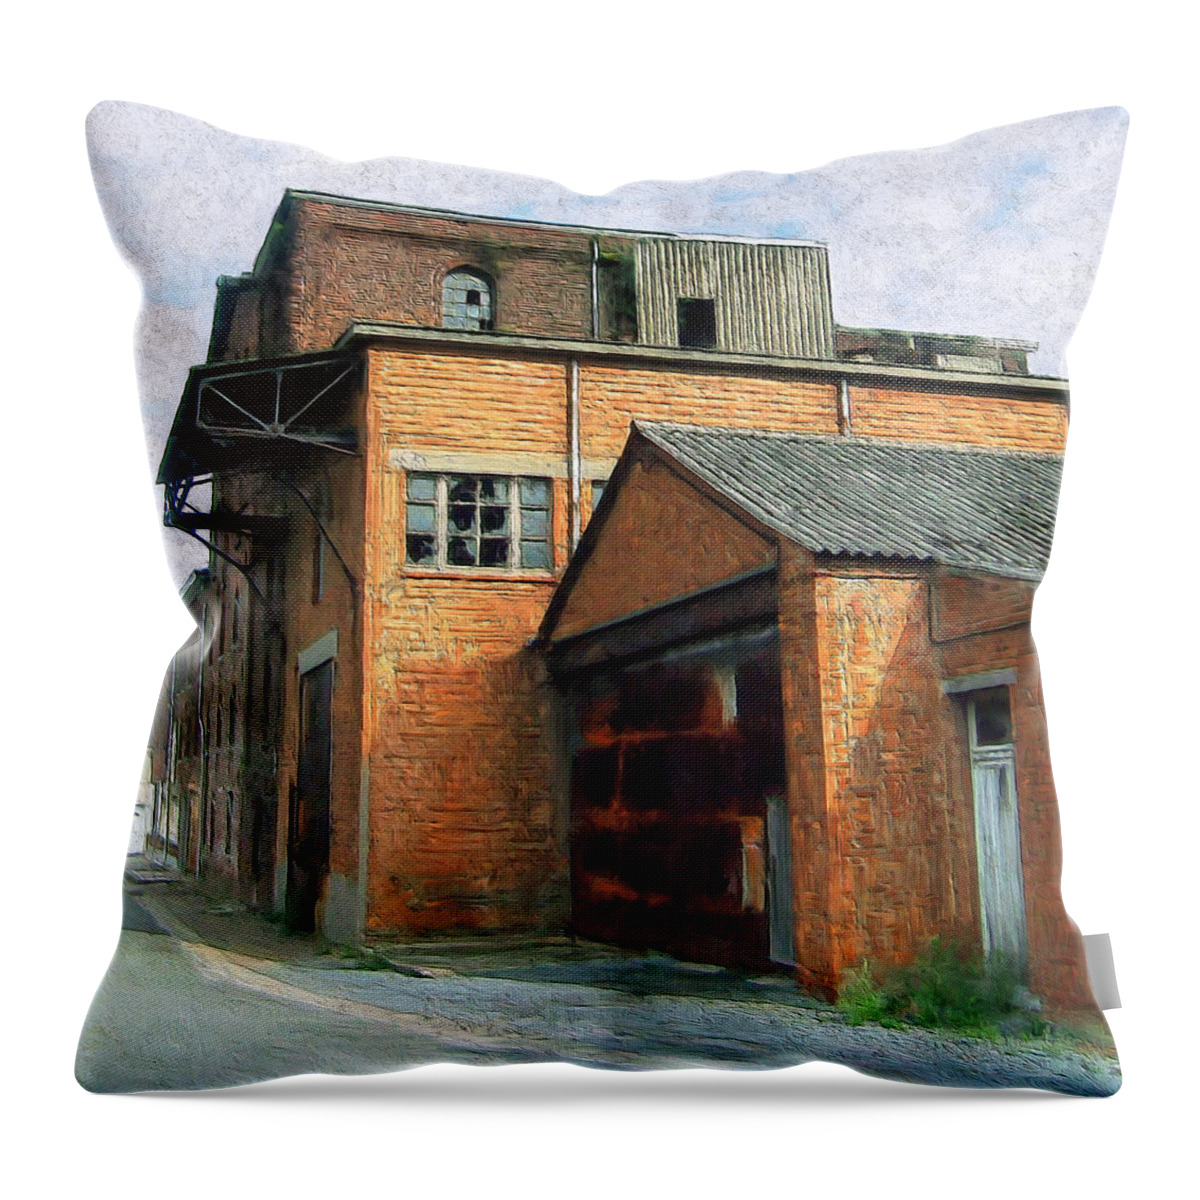 Old Foundry Building Throw Pillow featuring the painting Dunkirk Foundry by Dominic Piperata